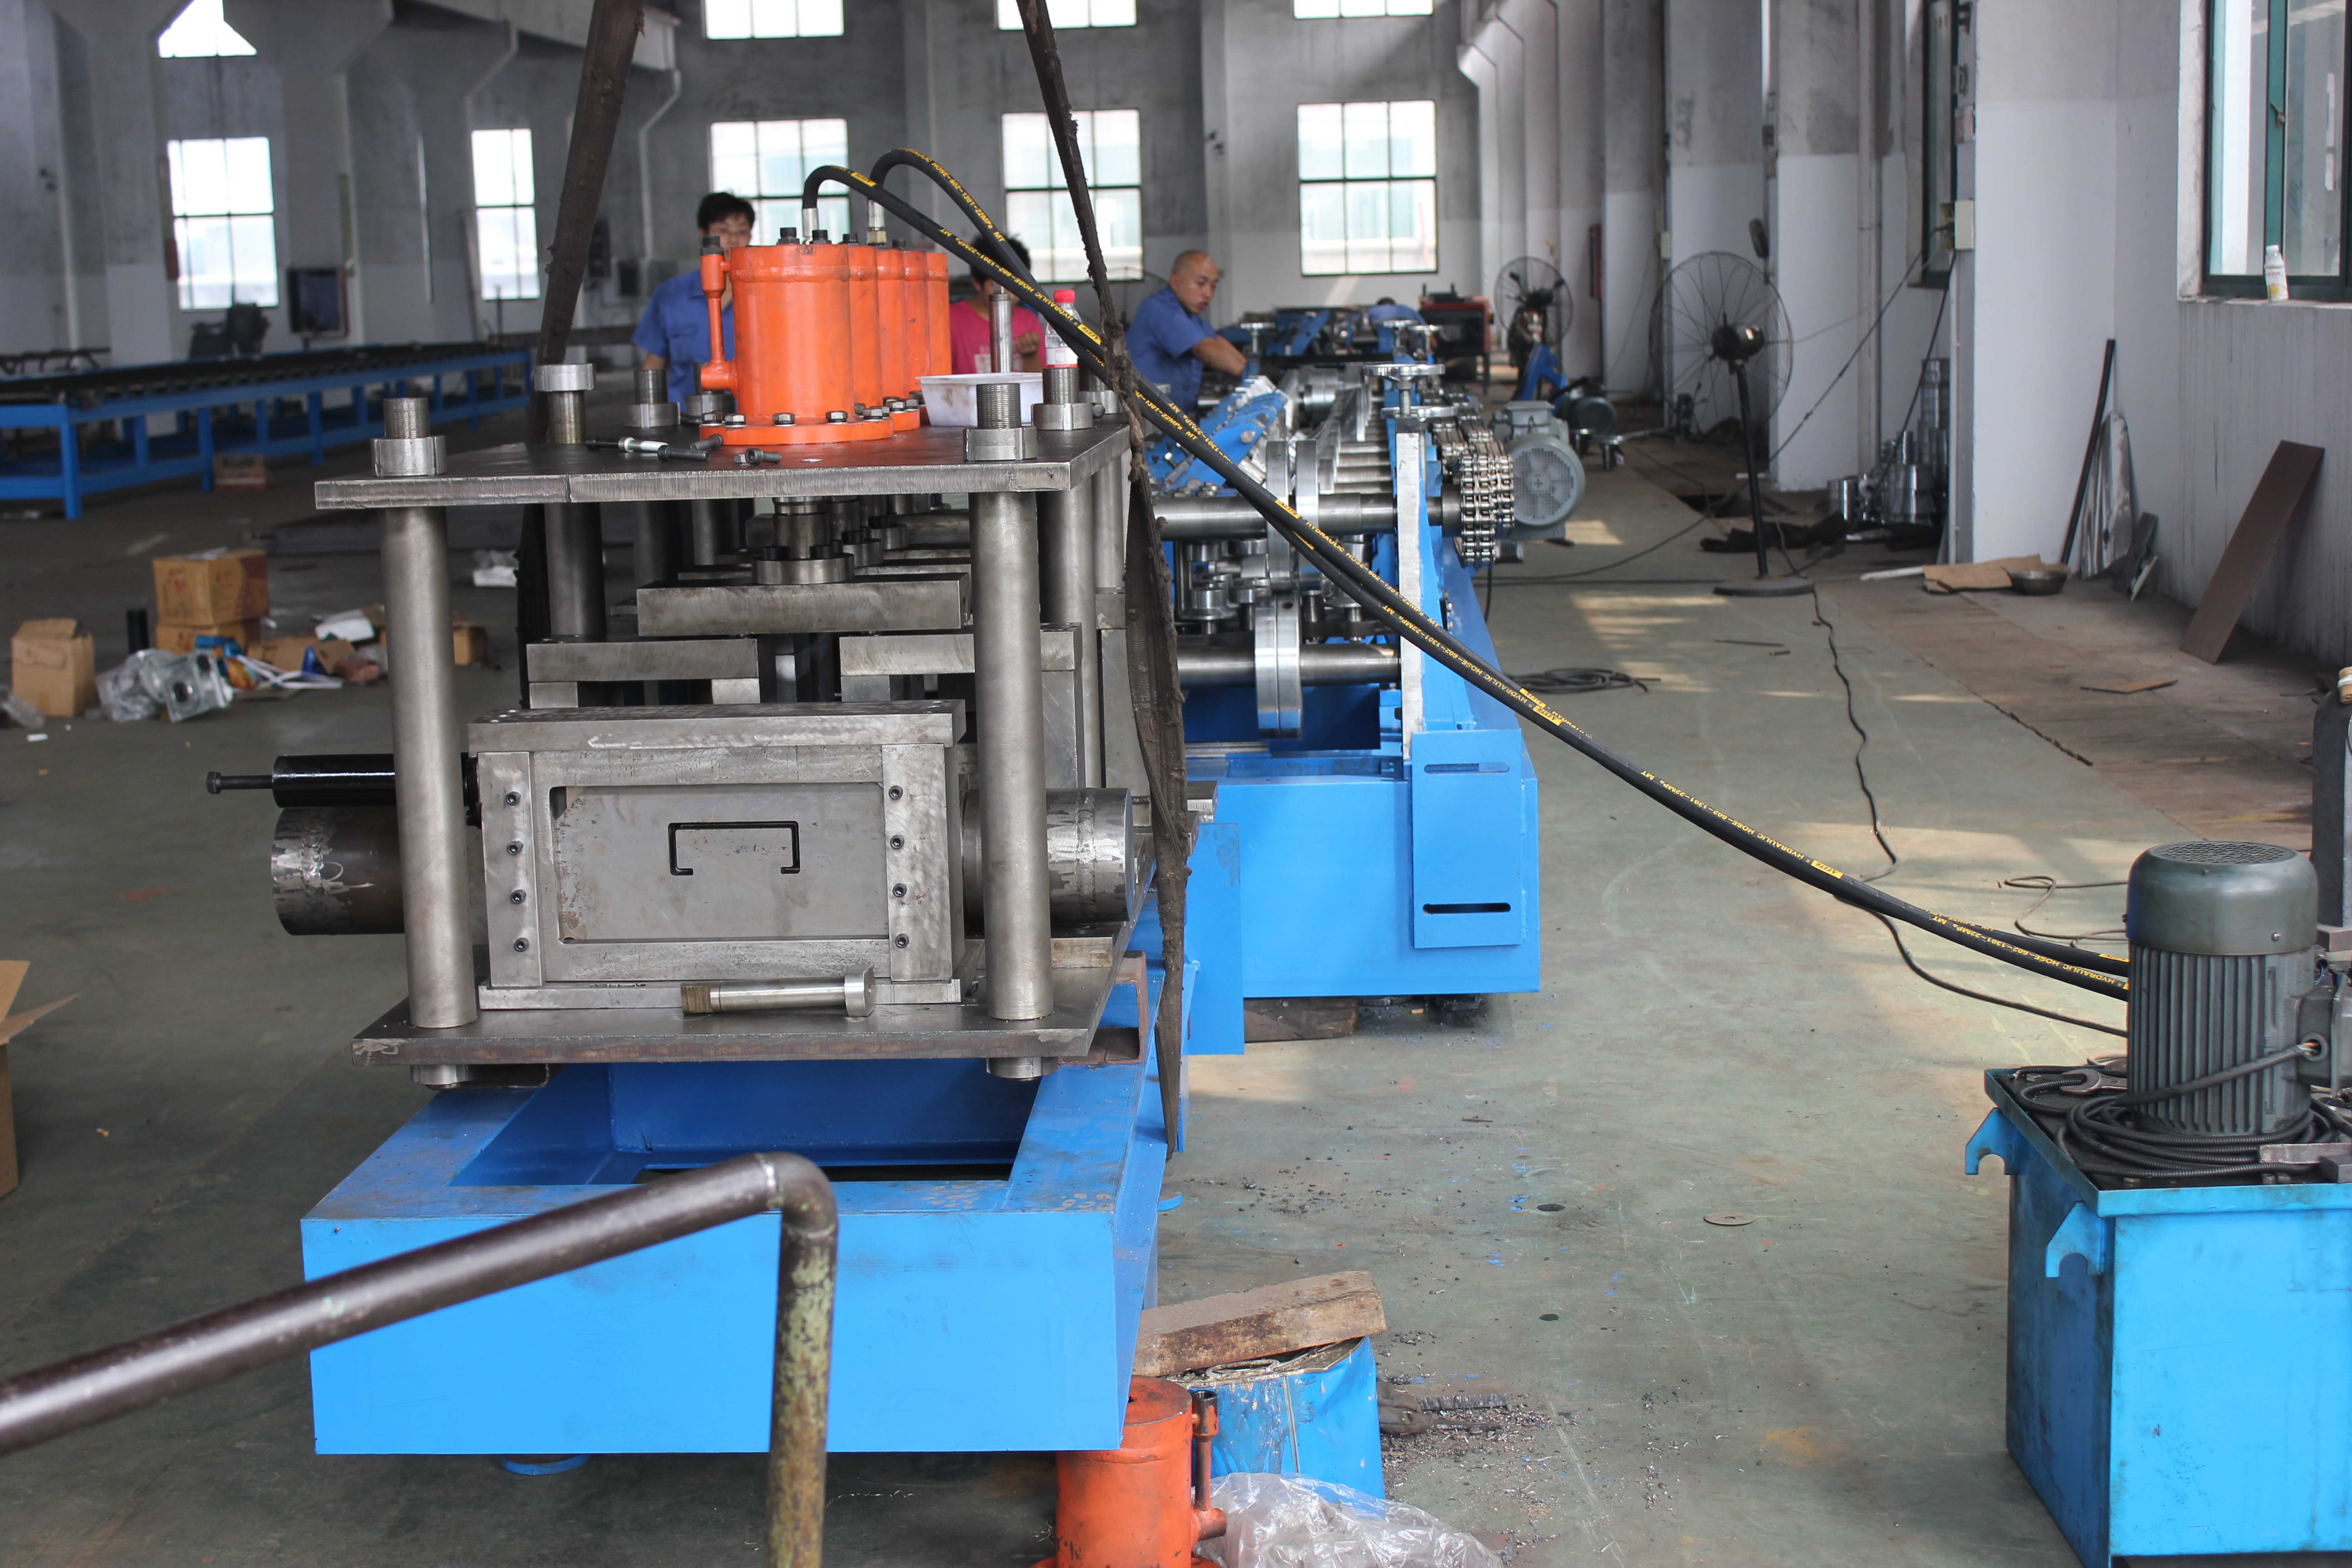 C Purlin Cold Roll Forming Machine With Auto Punching / Cutting